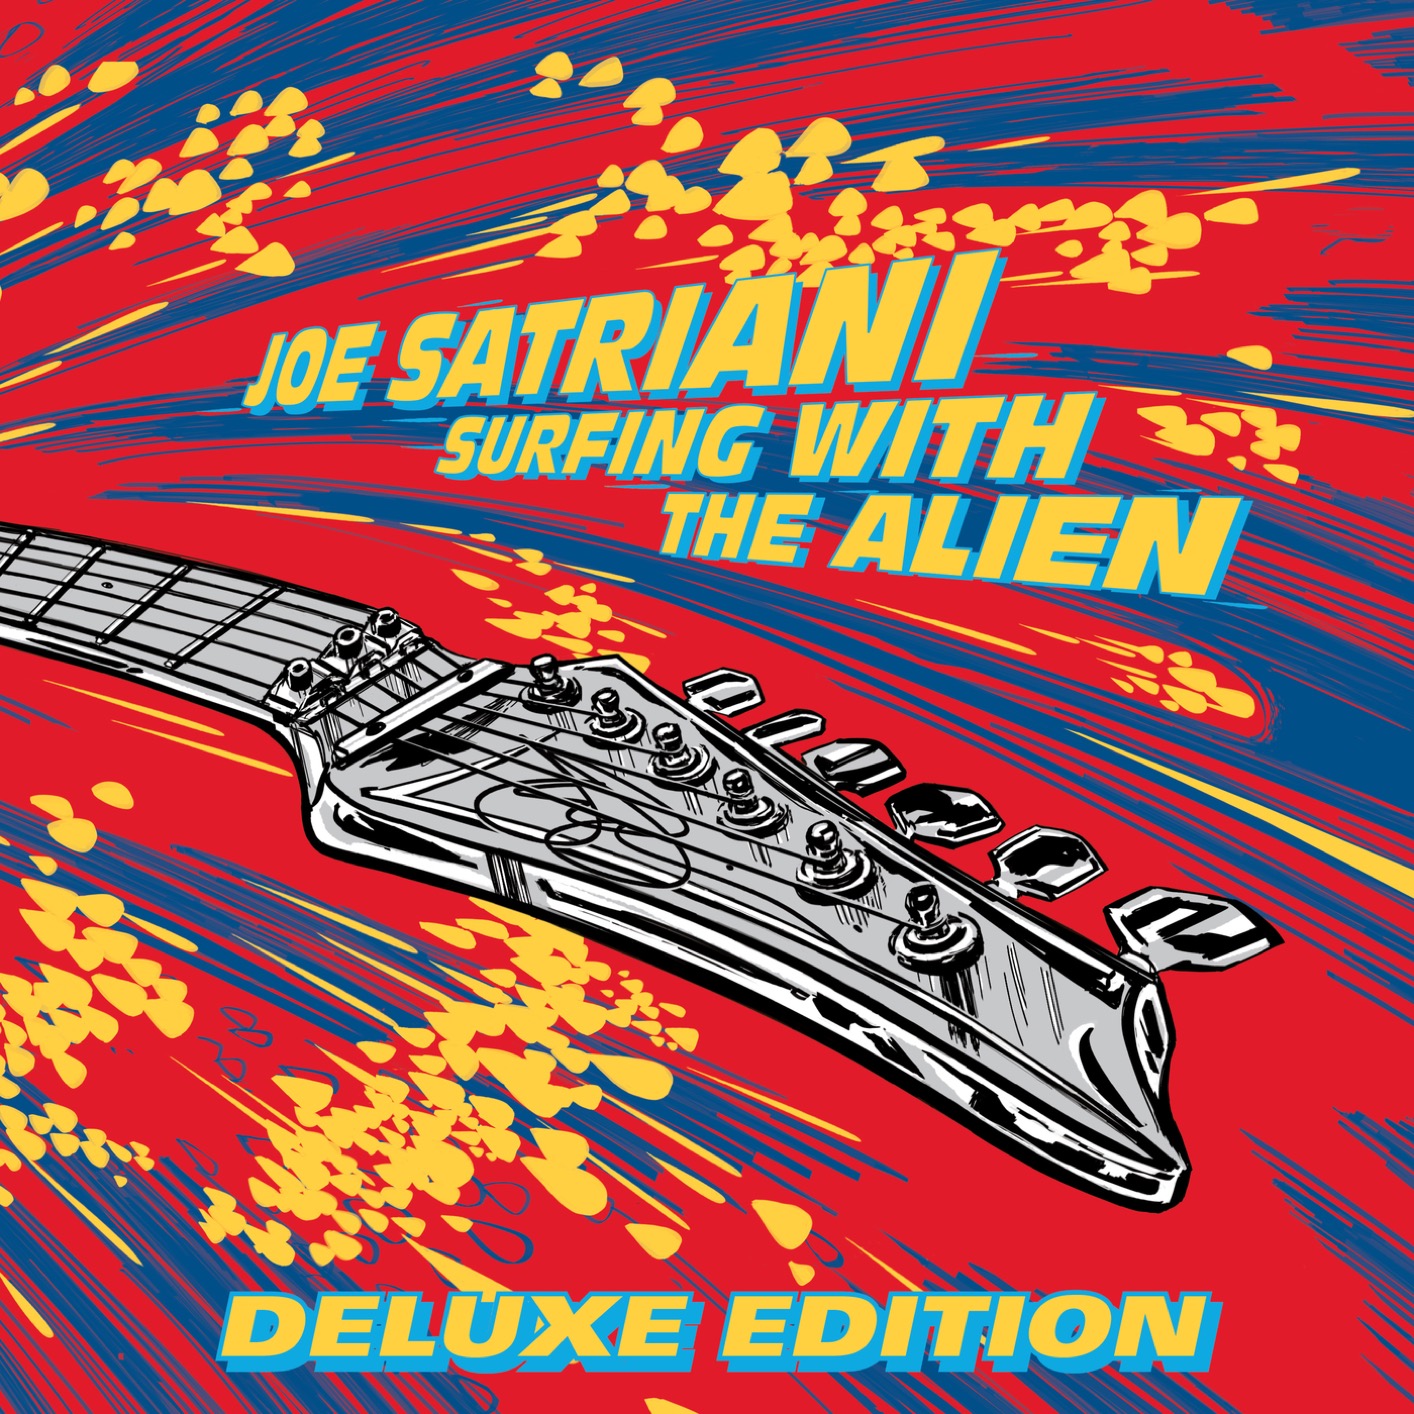 Joe Satriani - Surfing with the Alien (Remastered Deluxe Edition) (1987/2020) [FLAC 24bit/96kHz]